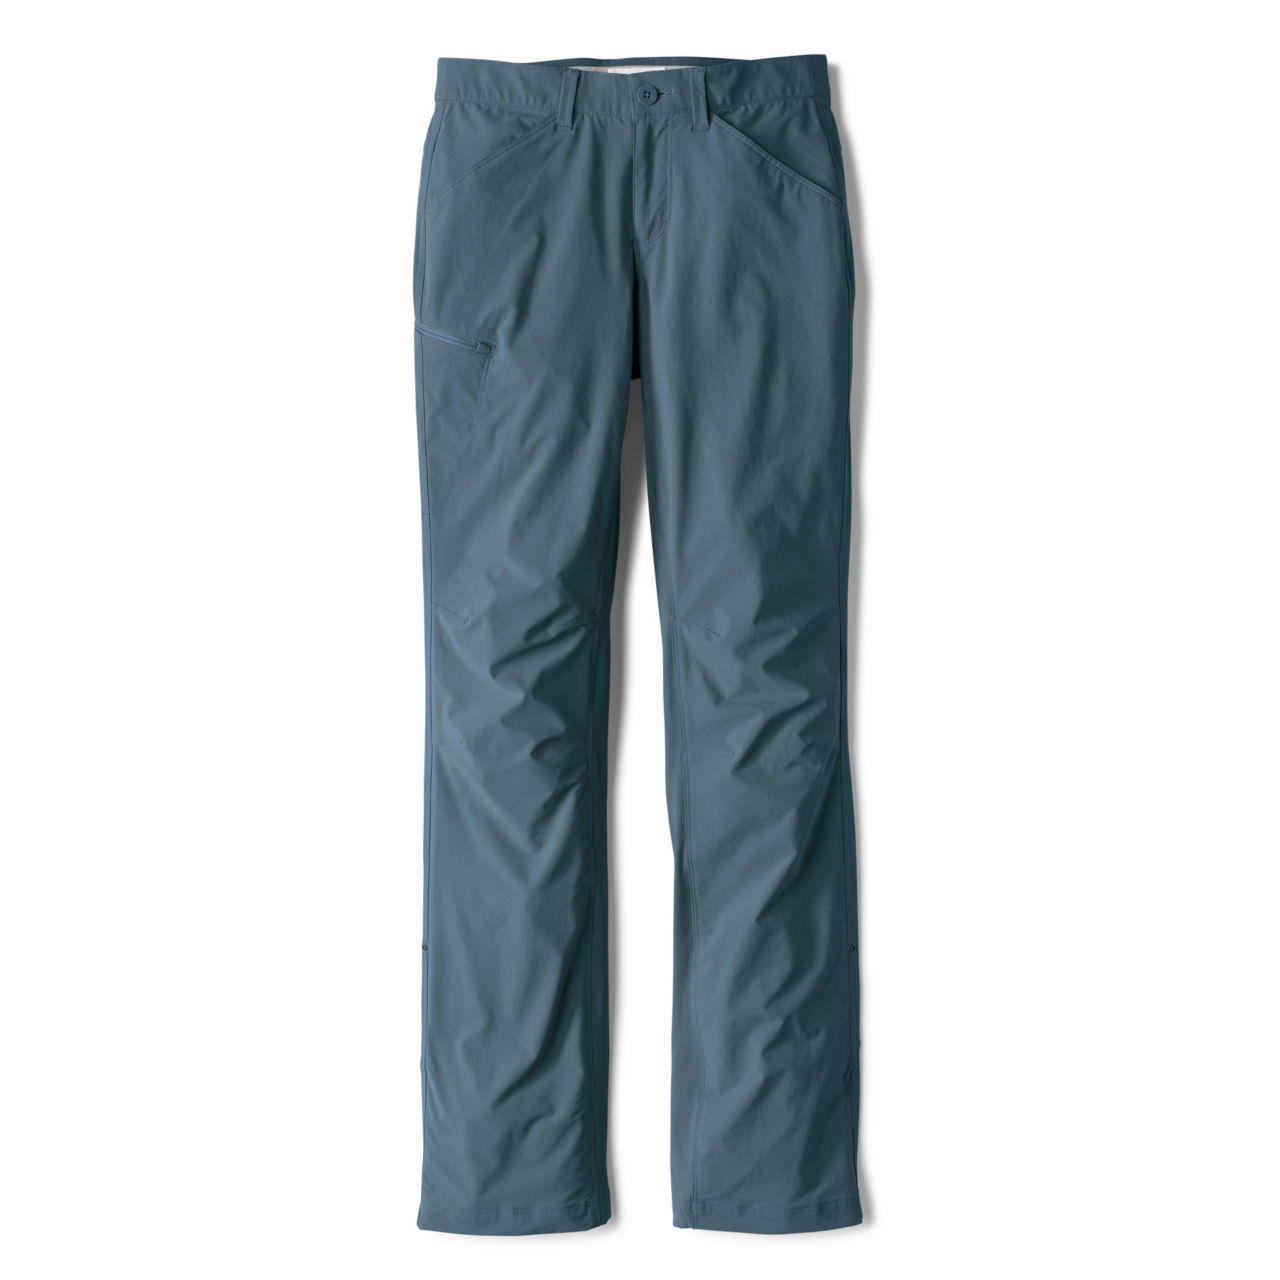 Jackson Quick-Dry Convertible Pants - STORM image number 4